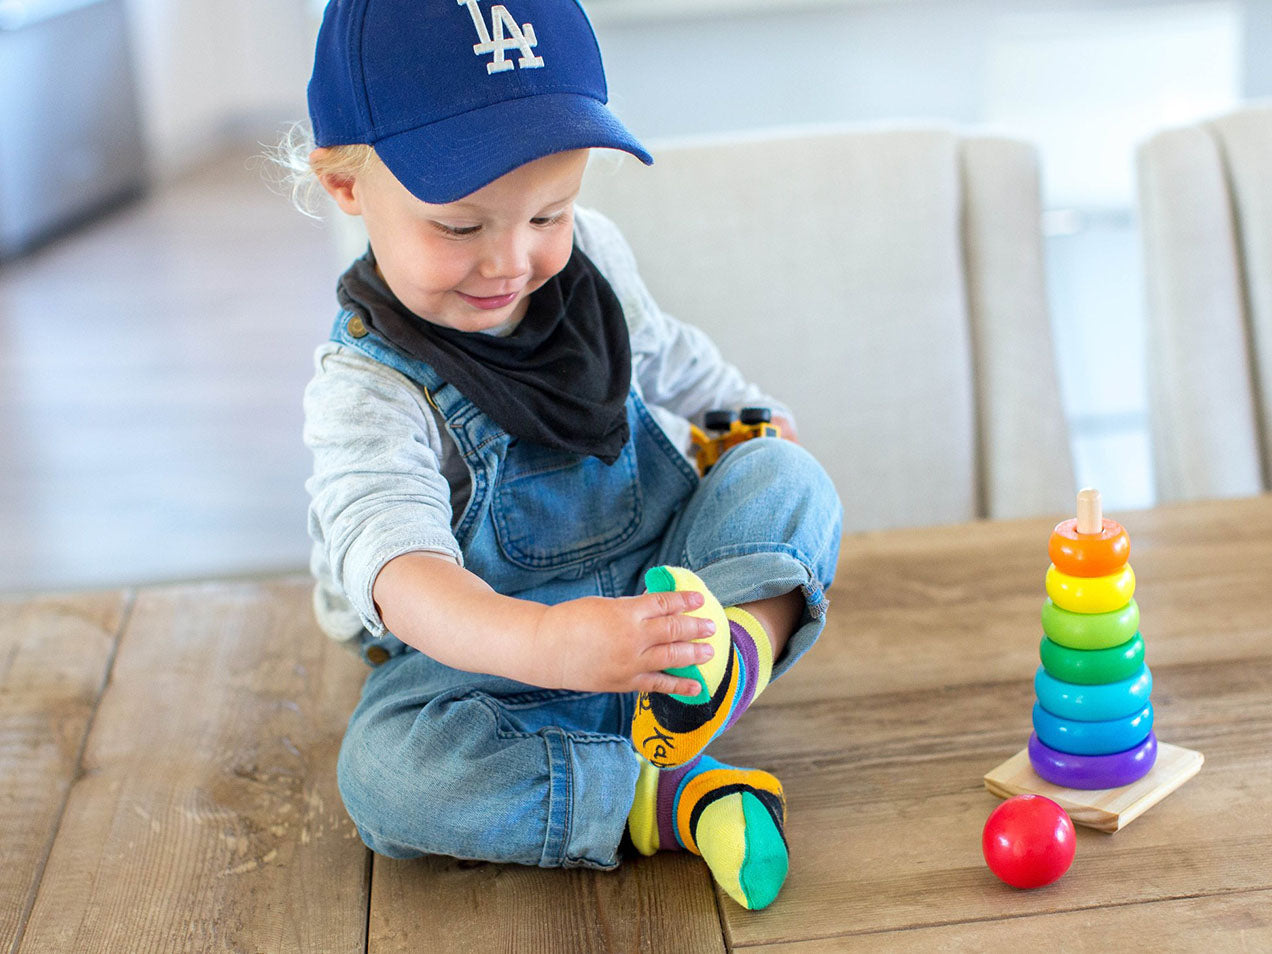 Sockabu picture kids with Dodgers hat and socks